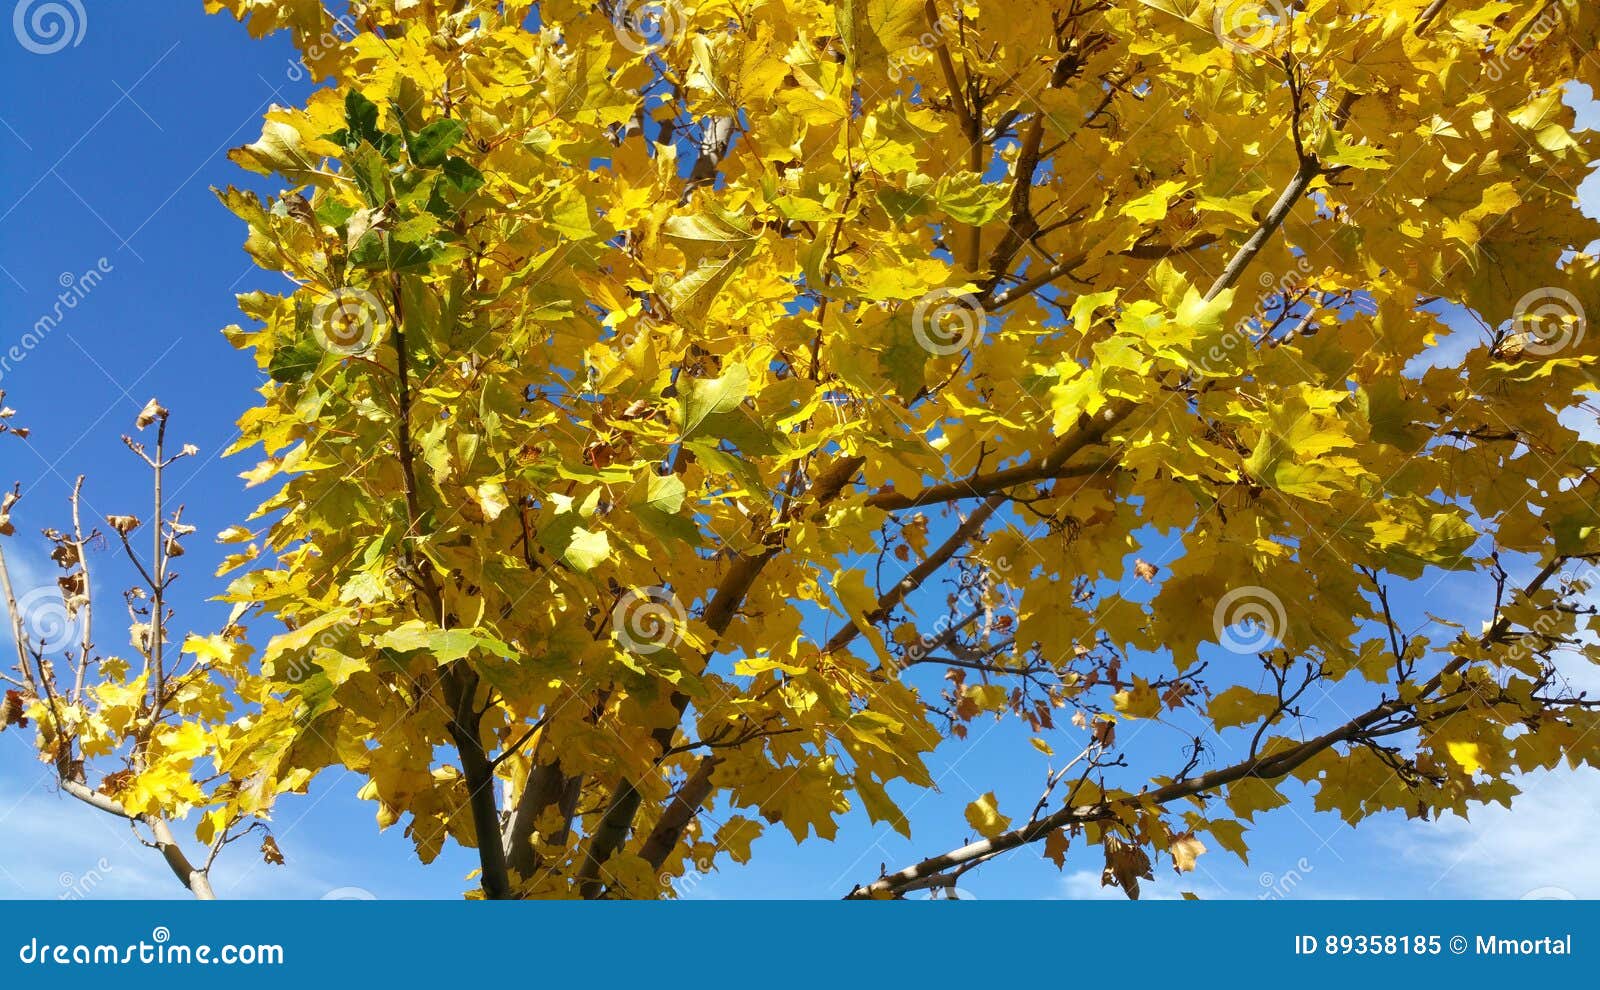 pomello tree leaves turning yellow and falling off